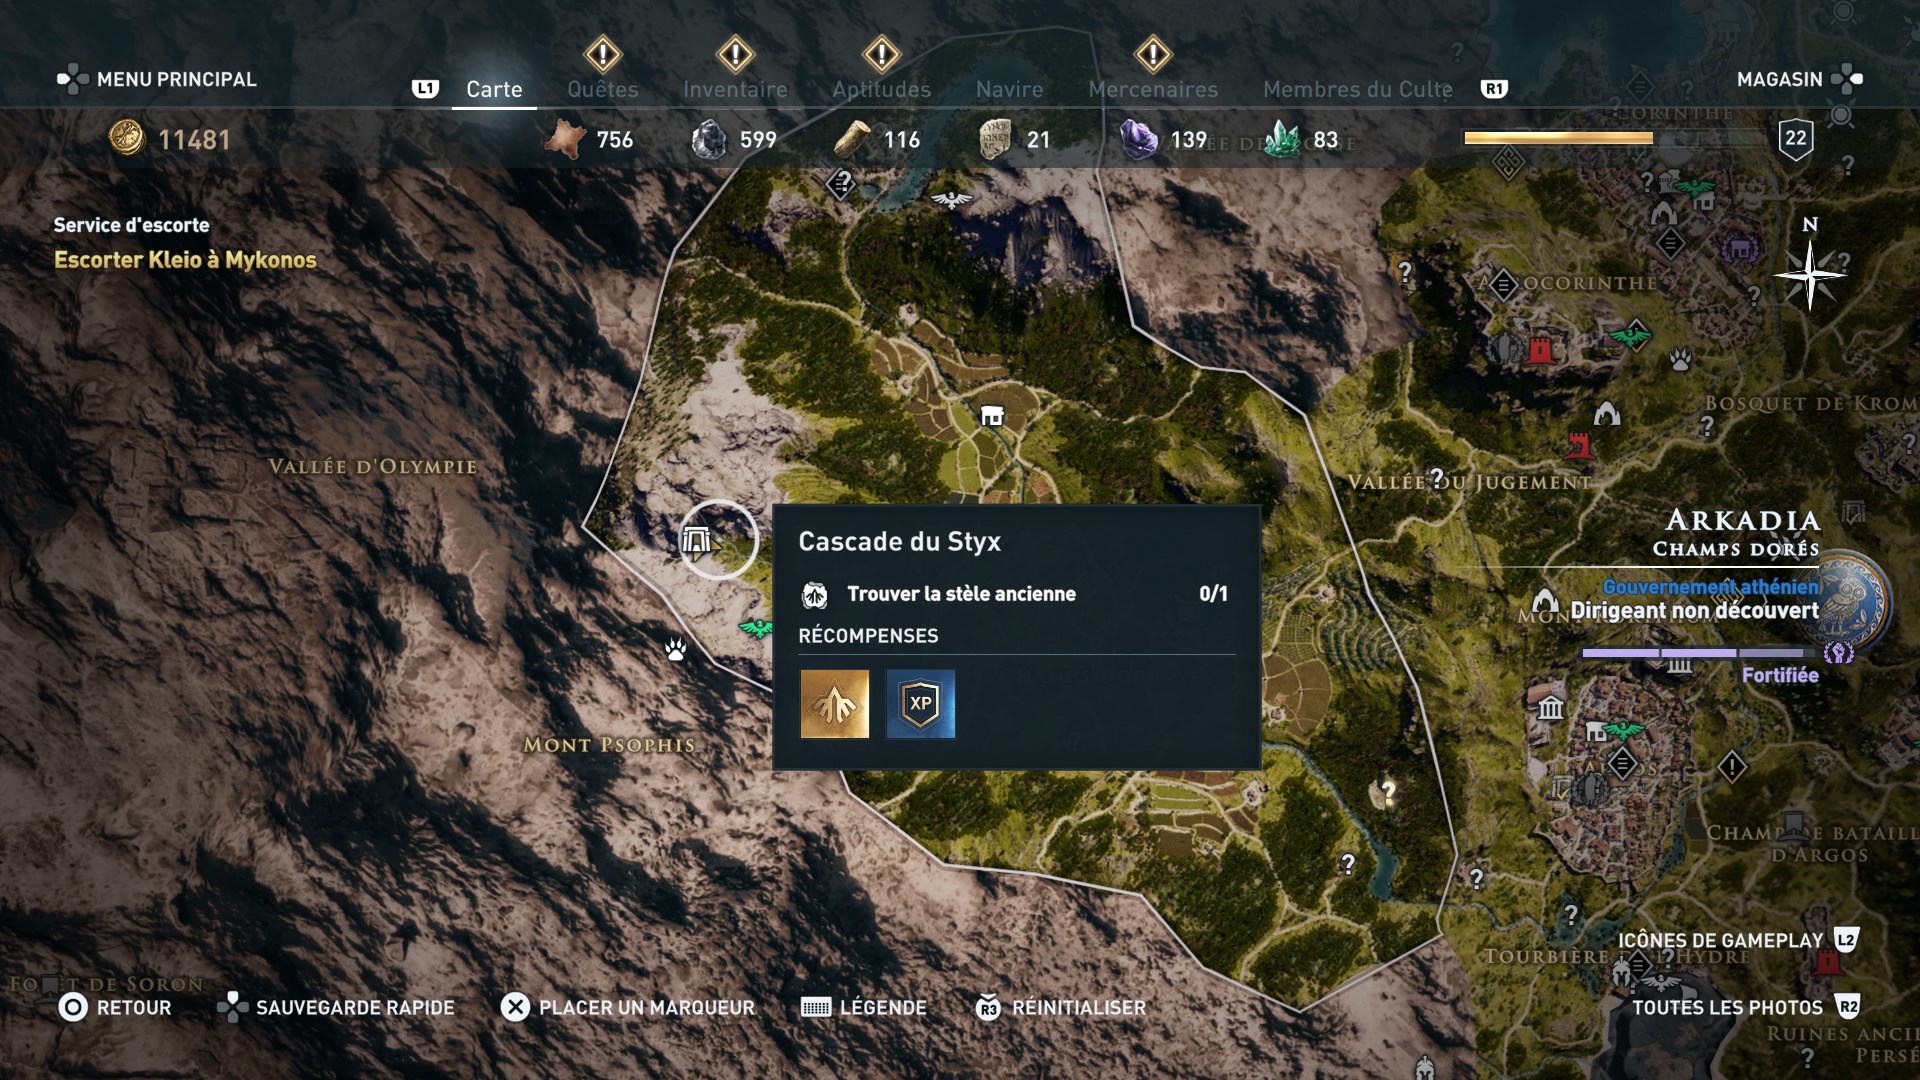 assassin's creed odyssey, ps4, xbox one, pc,u ubisosft, soluce, astuce, emplacement tombeau et stèle anciennes d'arkadia, cascade du styx